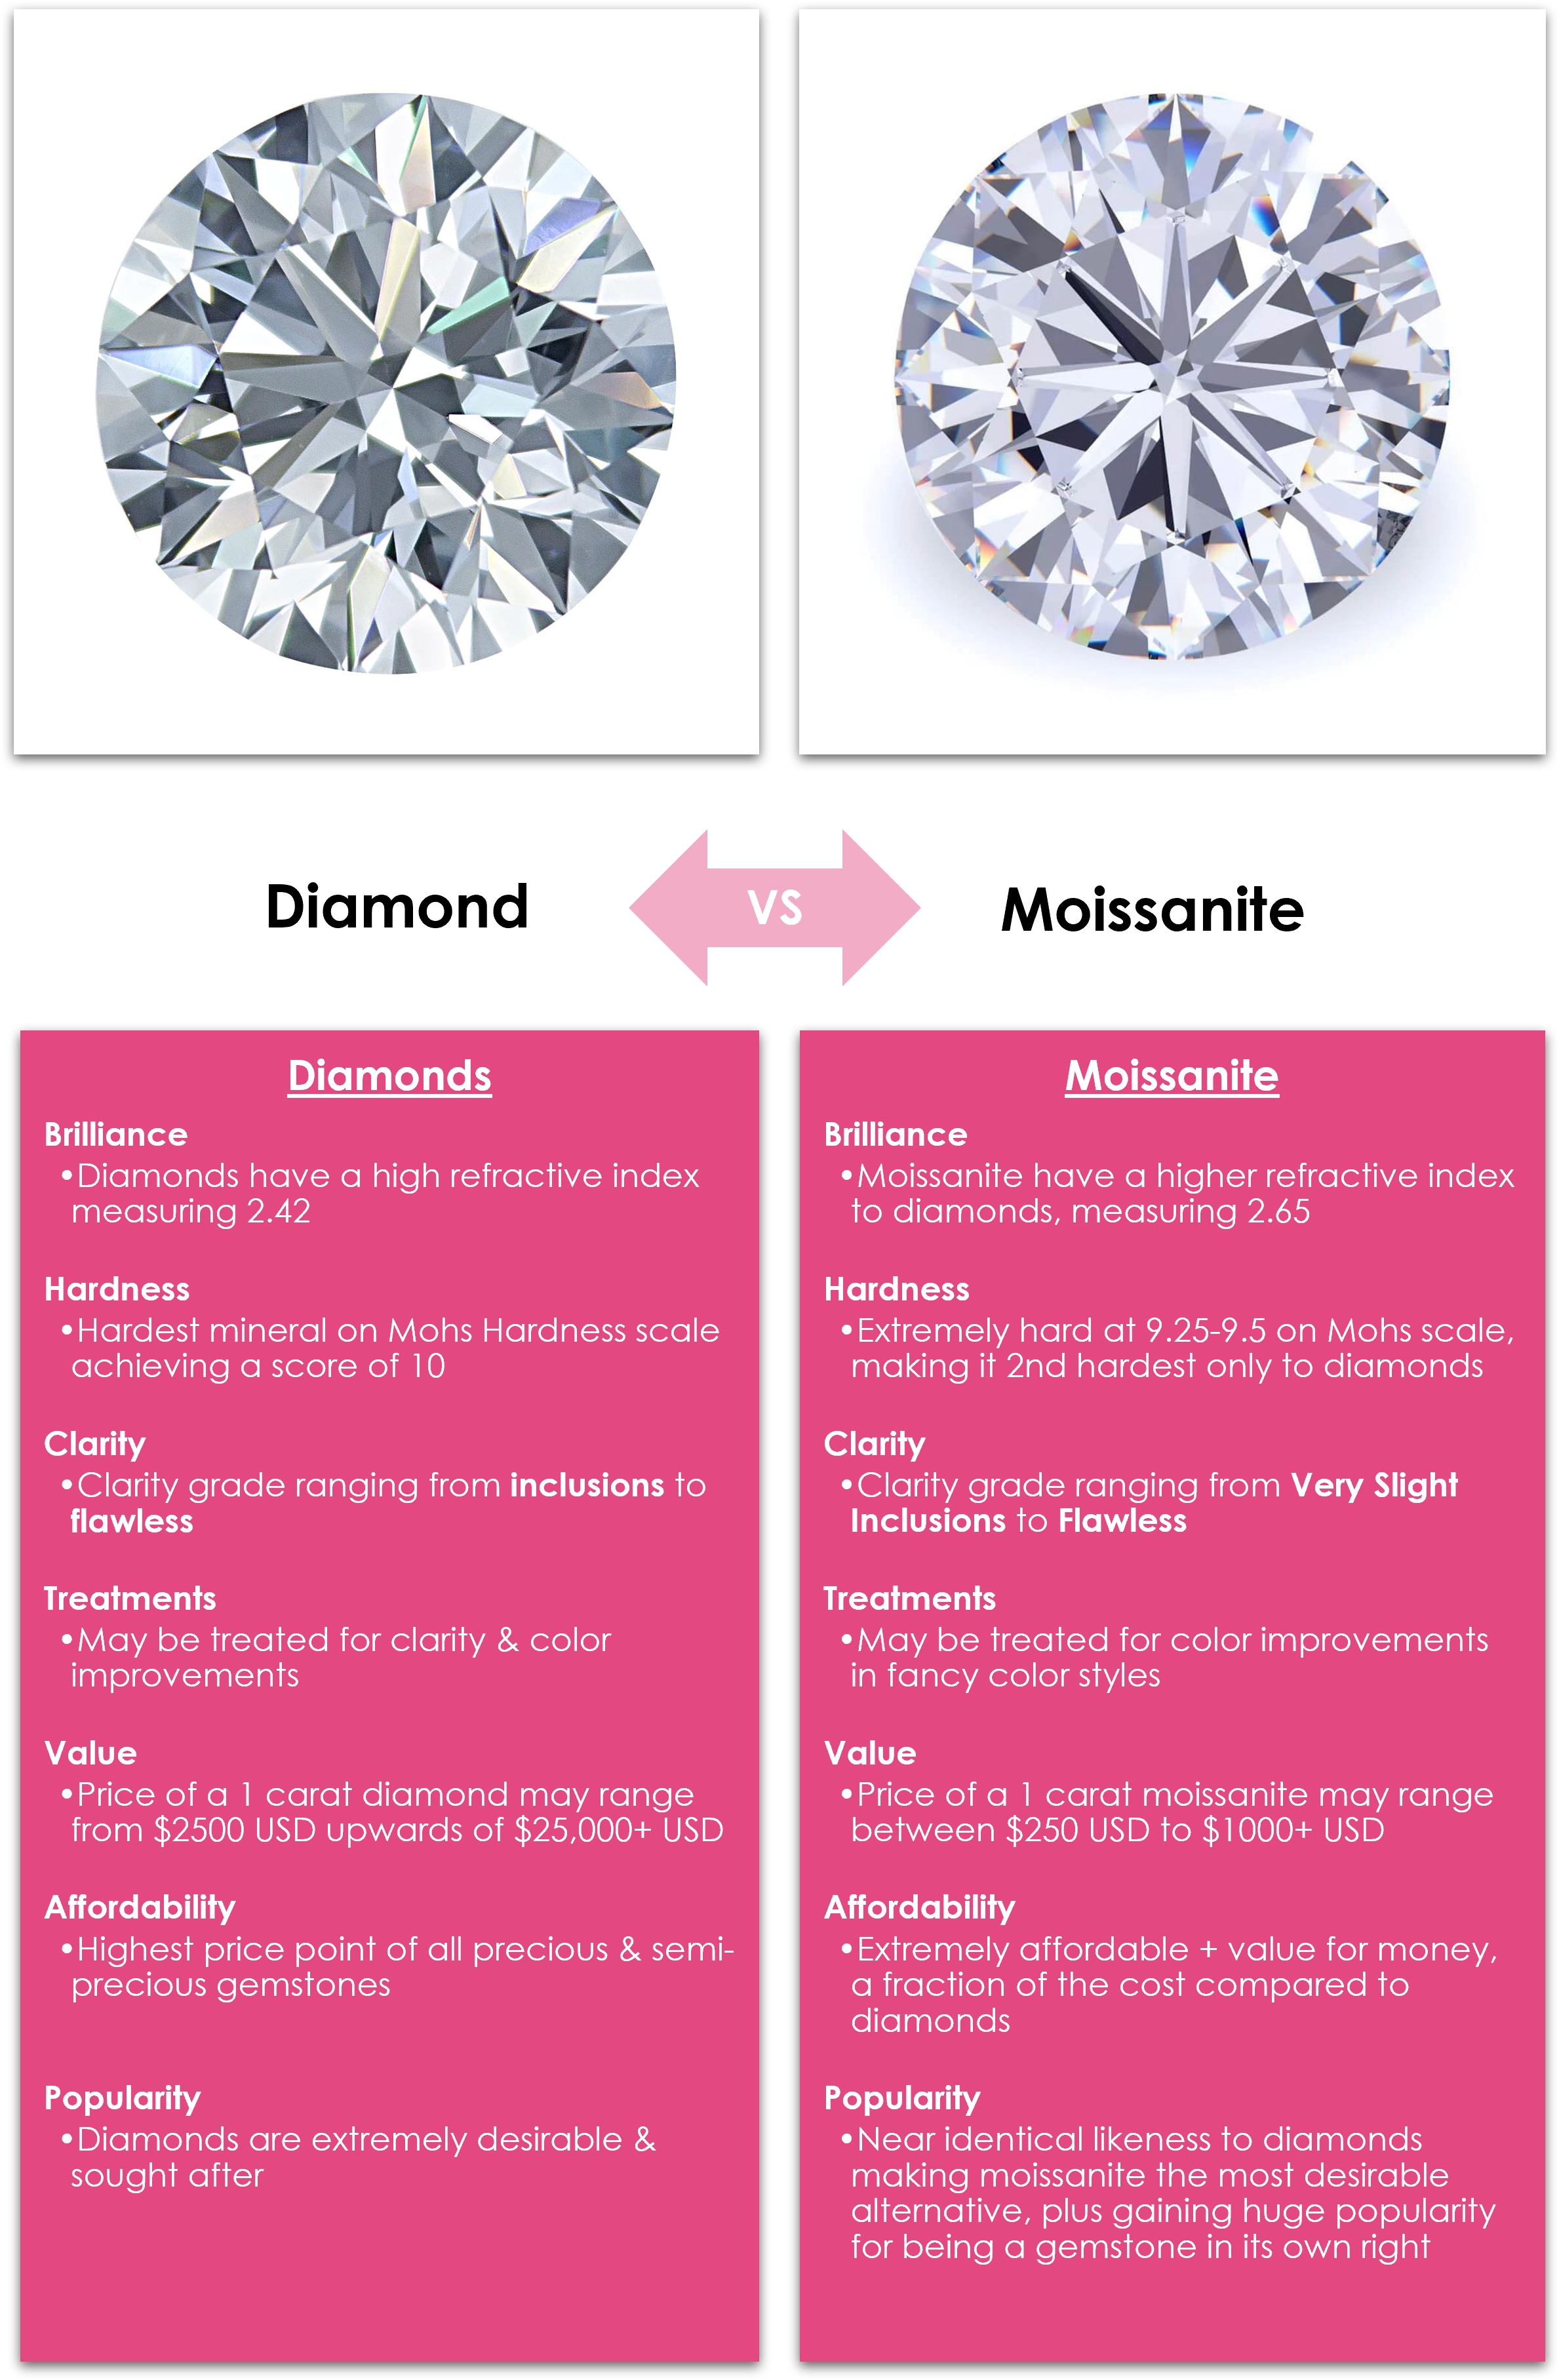 About Moissanite